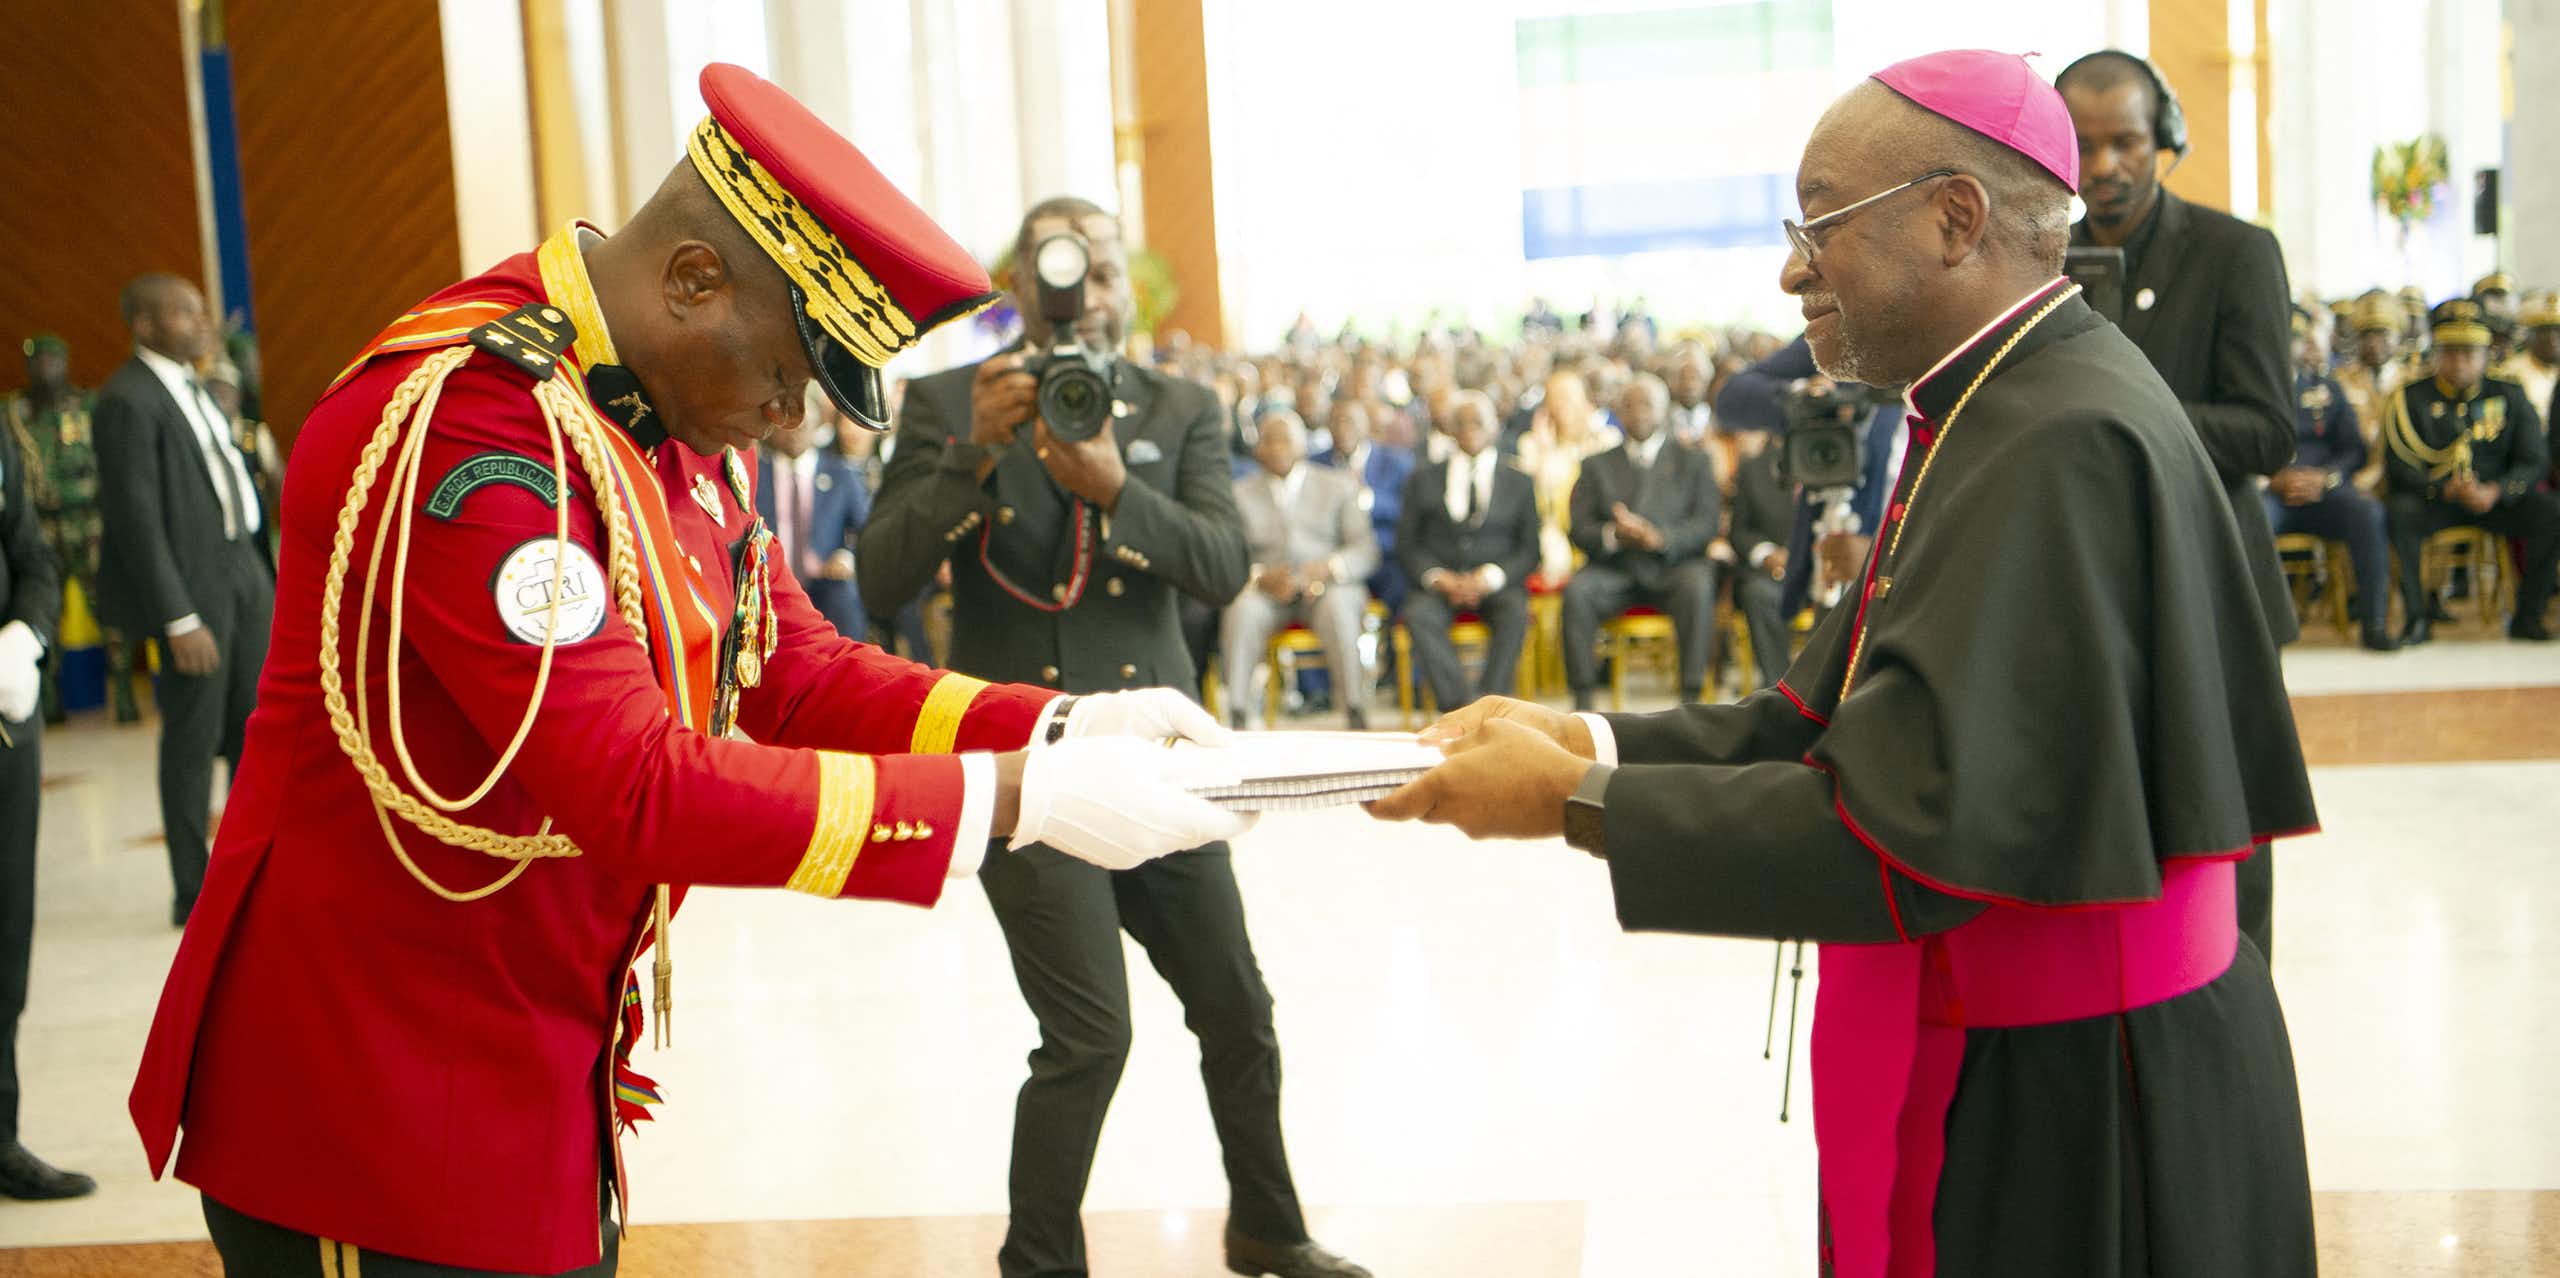 A man wearing ceremonial military uniform takes a bow while receiving a document from another man wearing a cassock.